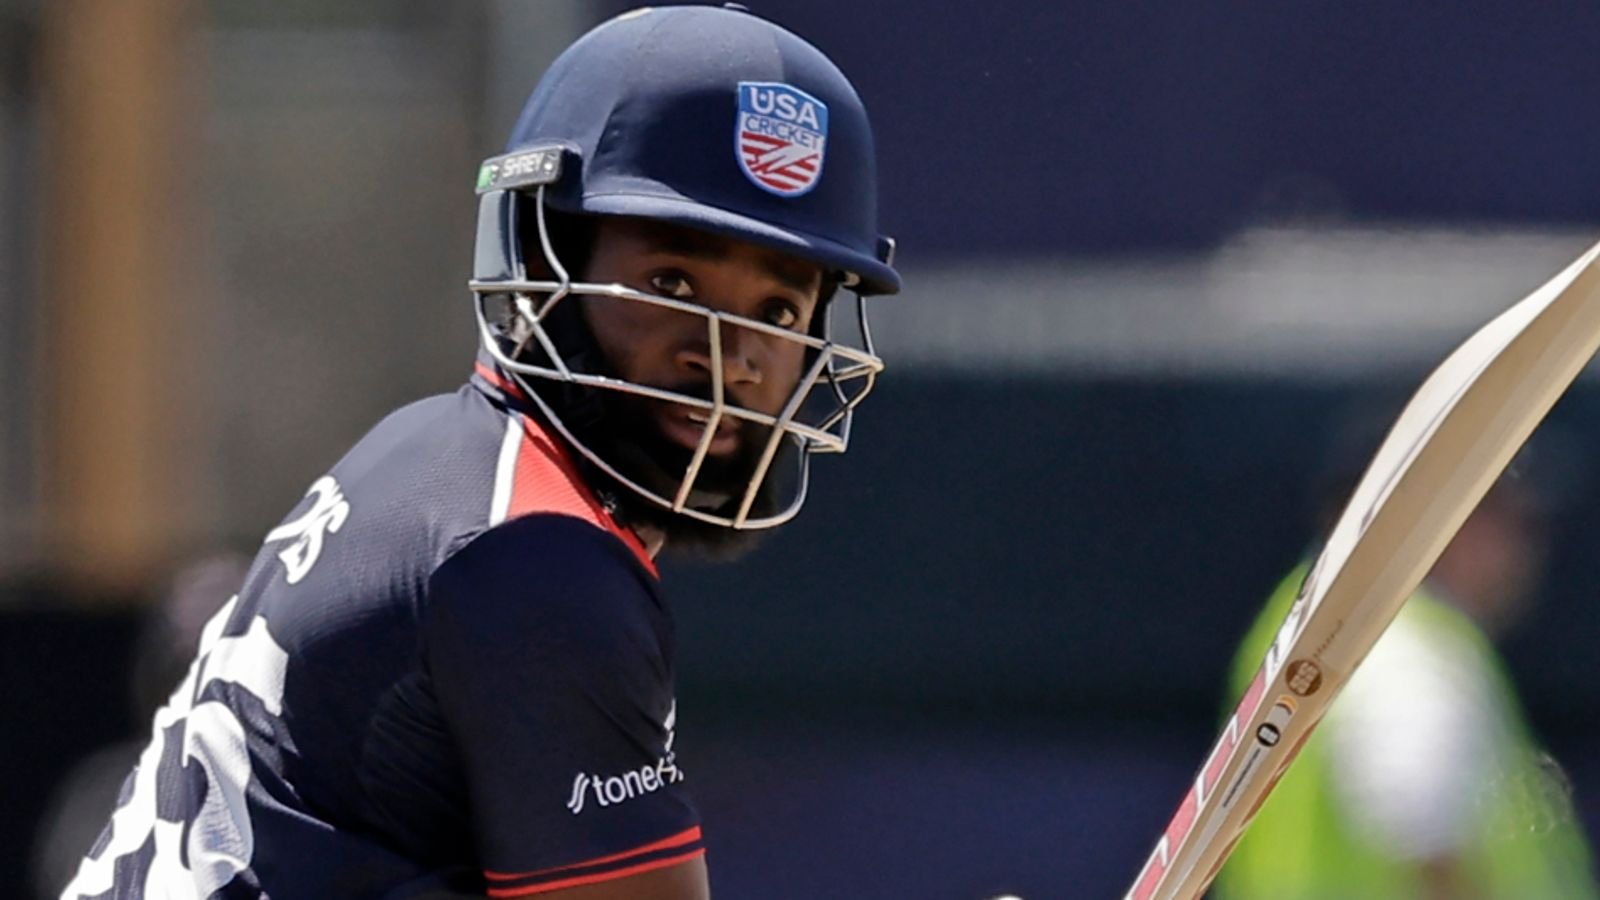 USA face South Africa as T20 World Cup Super 8s begins LIVE!